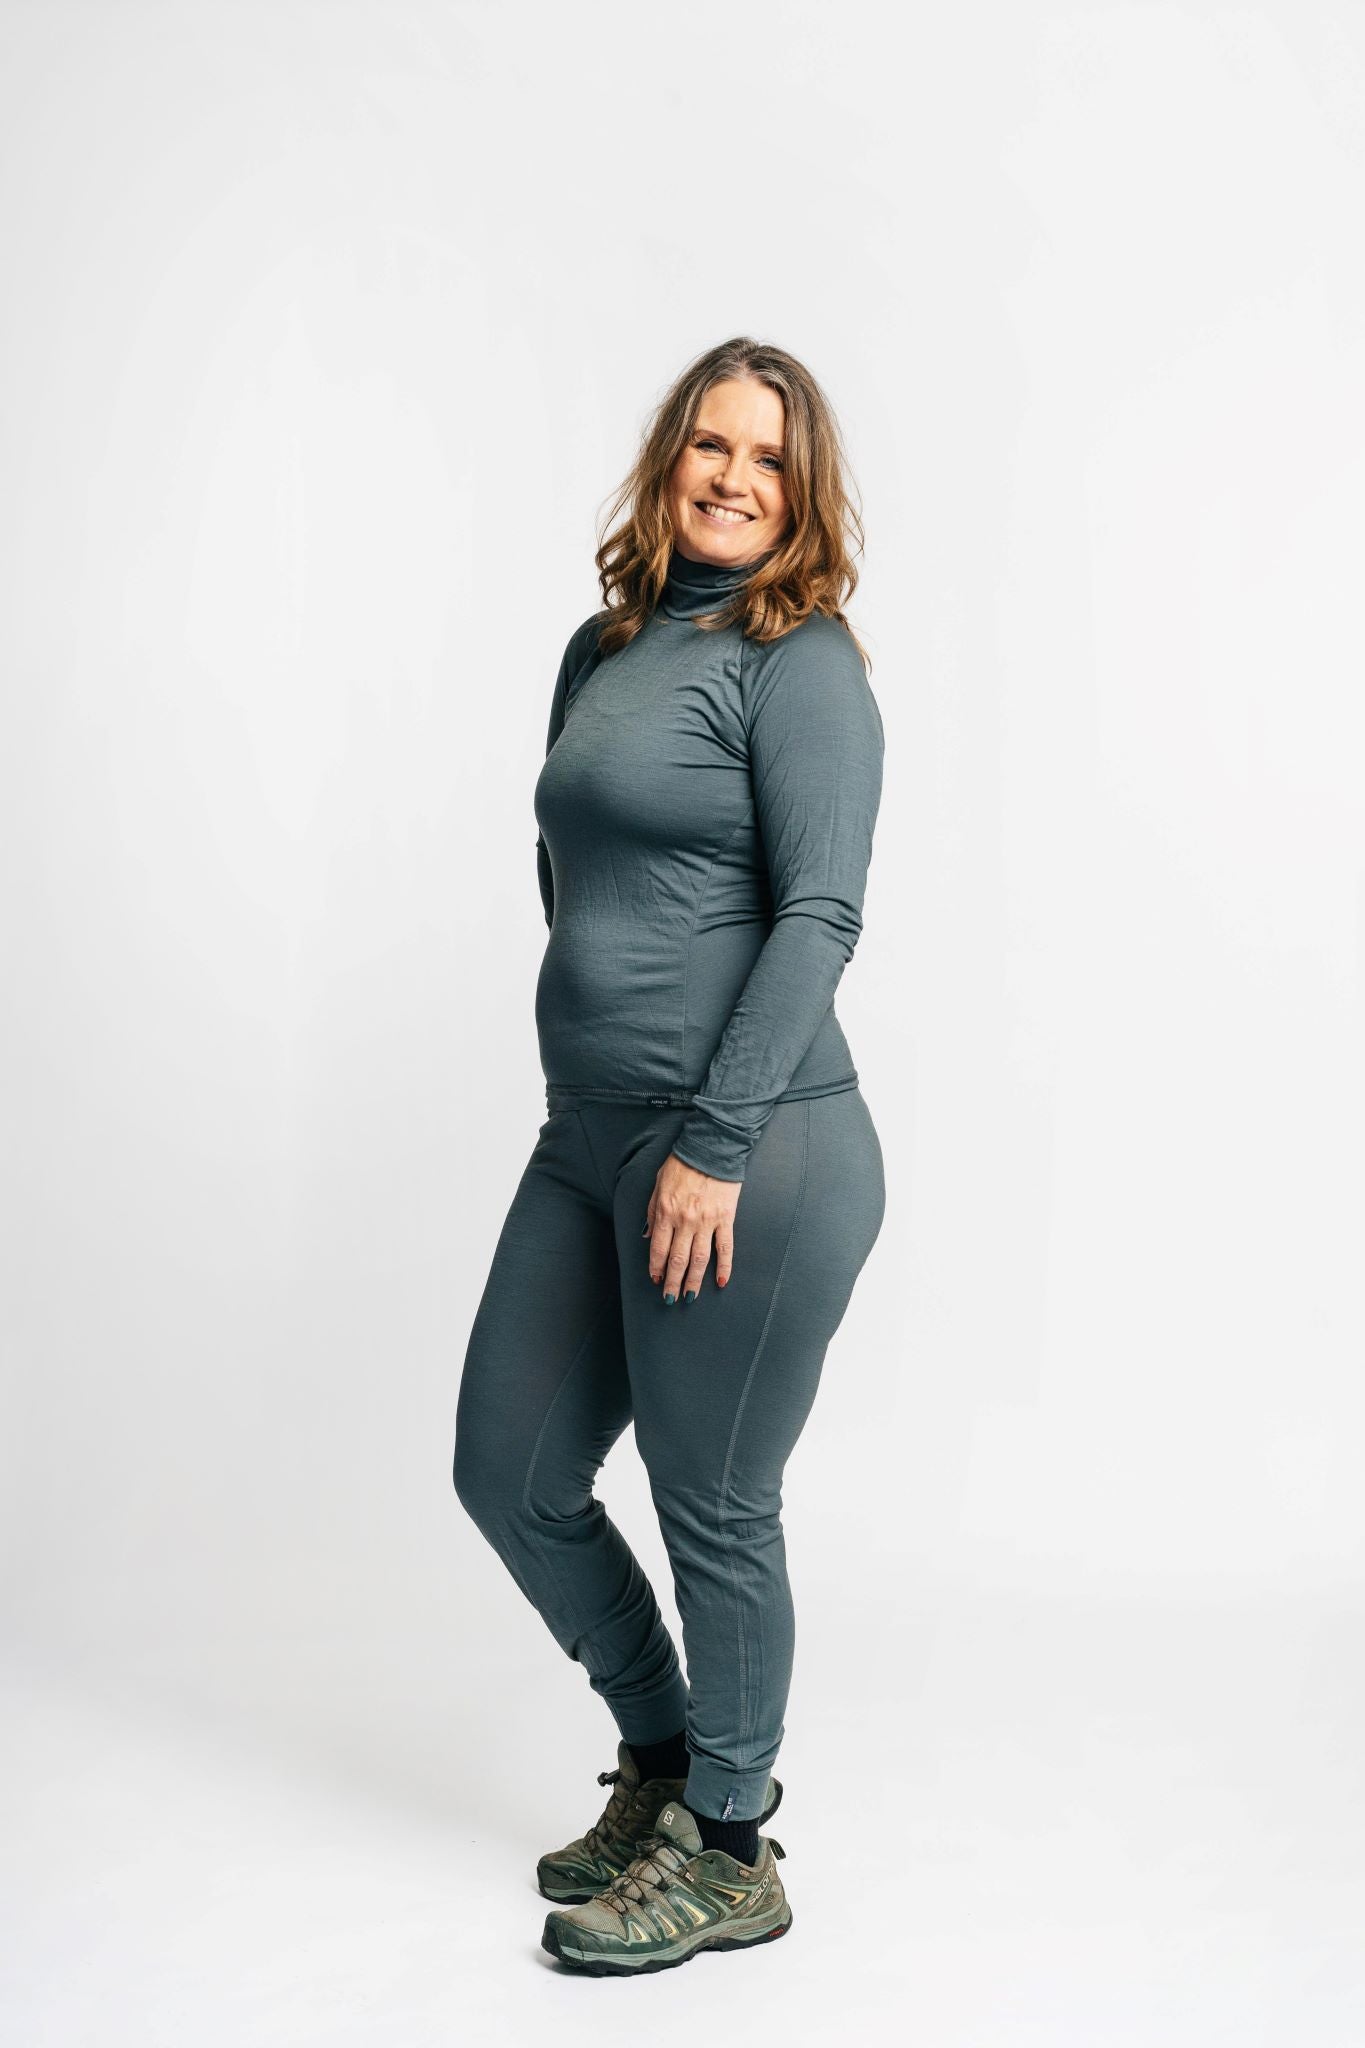 alpine fit merino base layer top and bottom on model side view